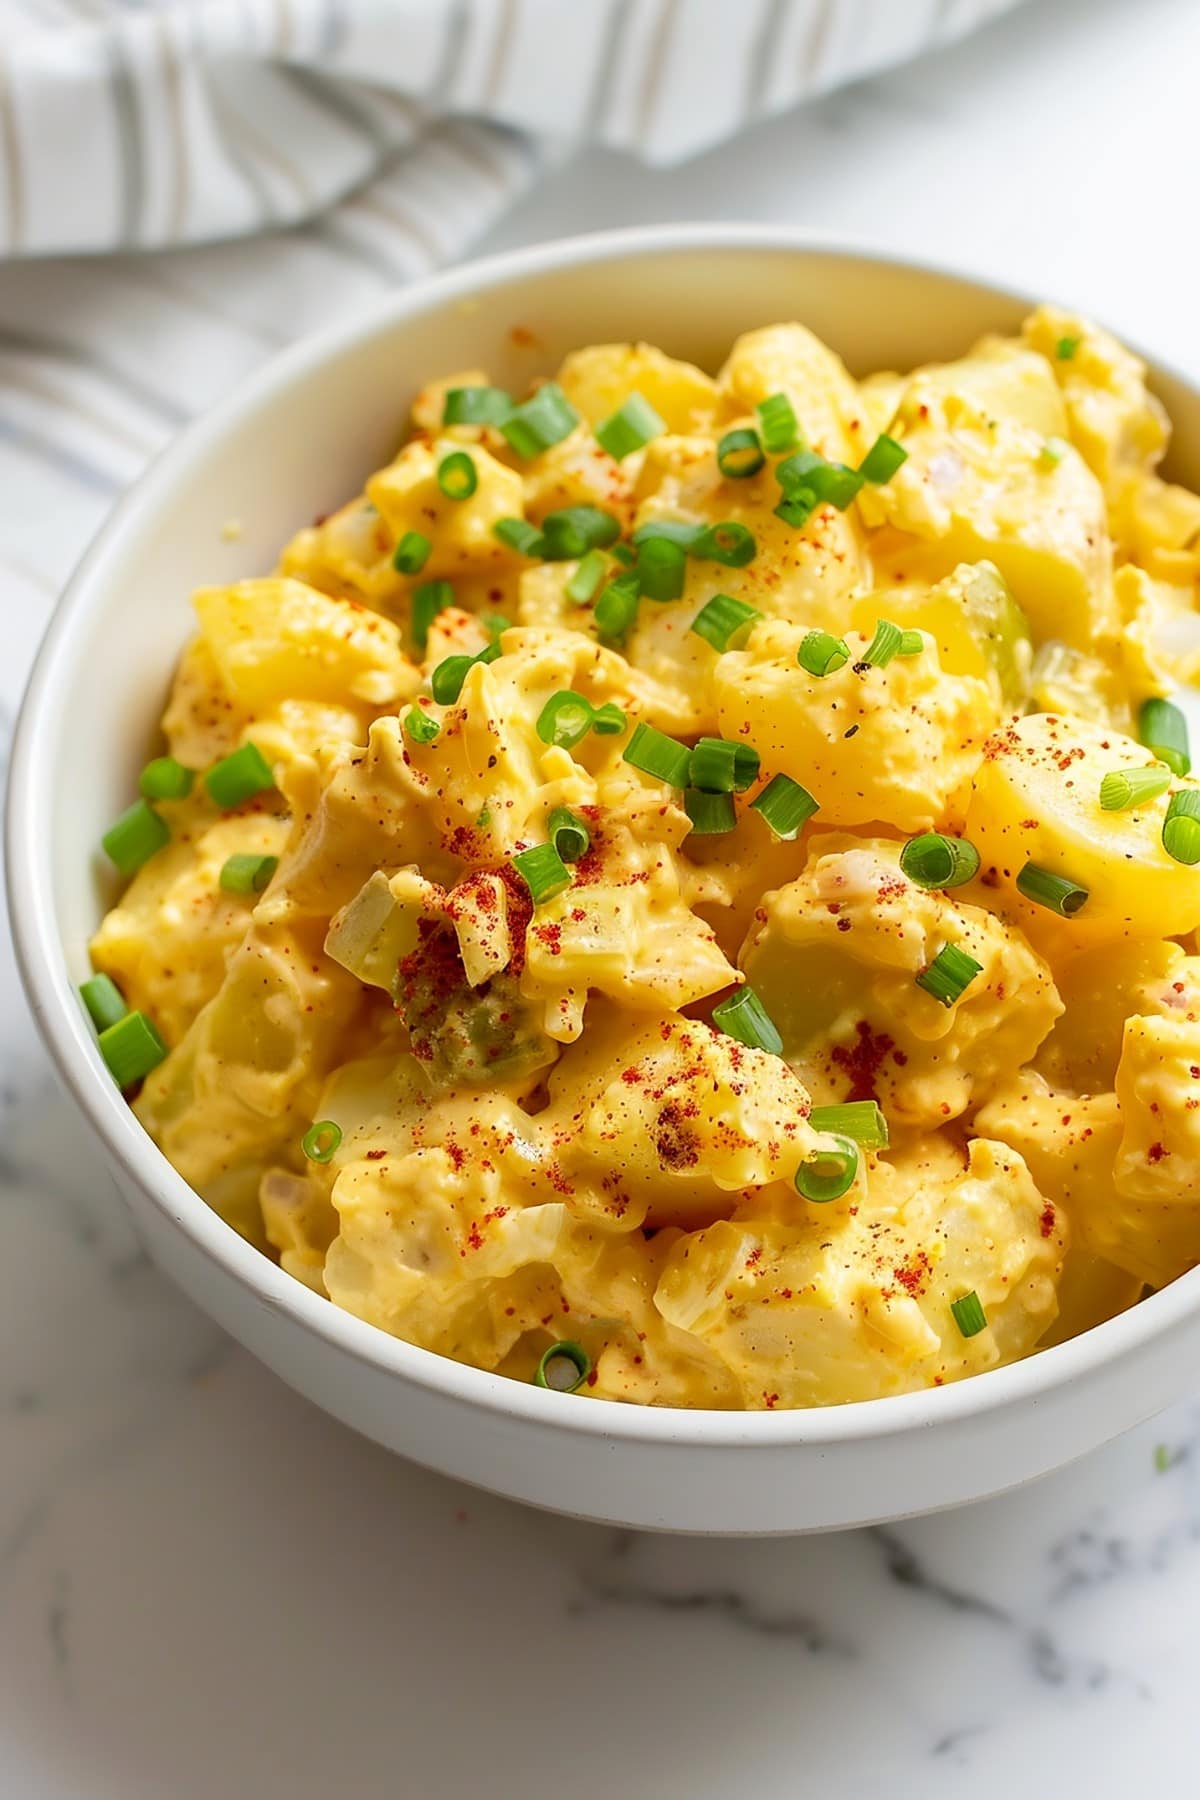 Hearty Southern potato salad, boasting a blend of mayonnaise, mustard, and vinegar for tangy flavor